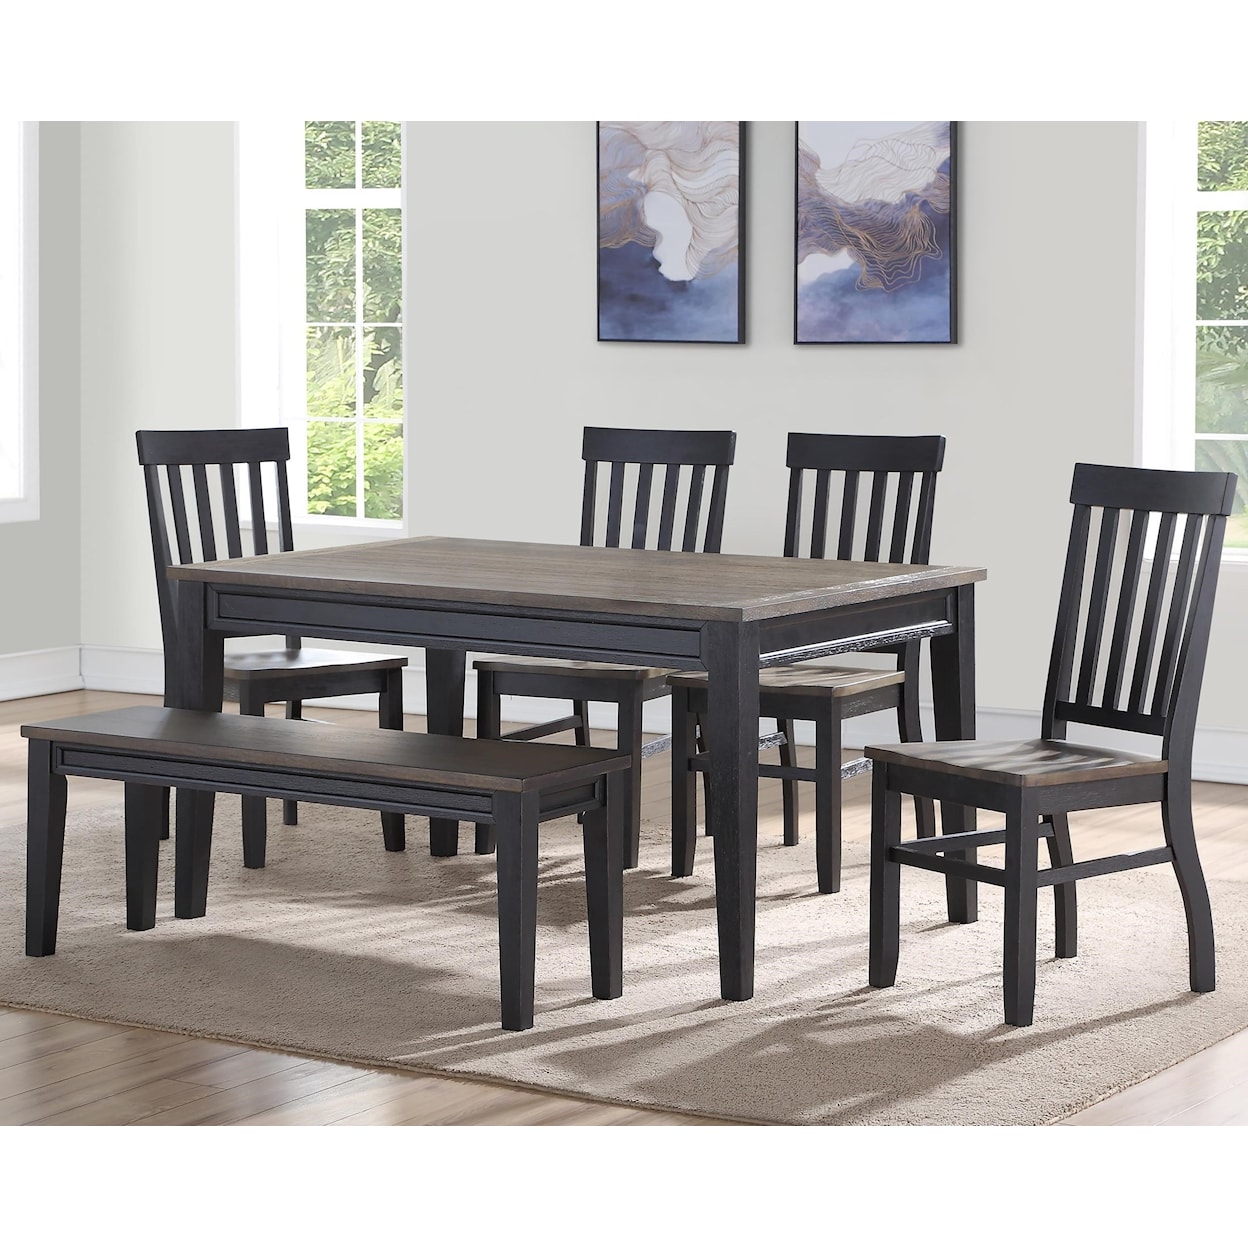 Steve Silver Raven Dining Set with Bench